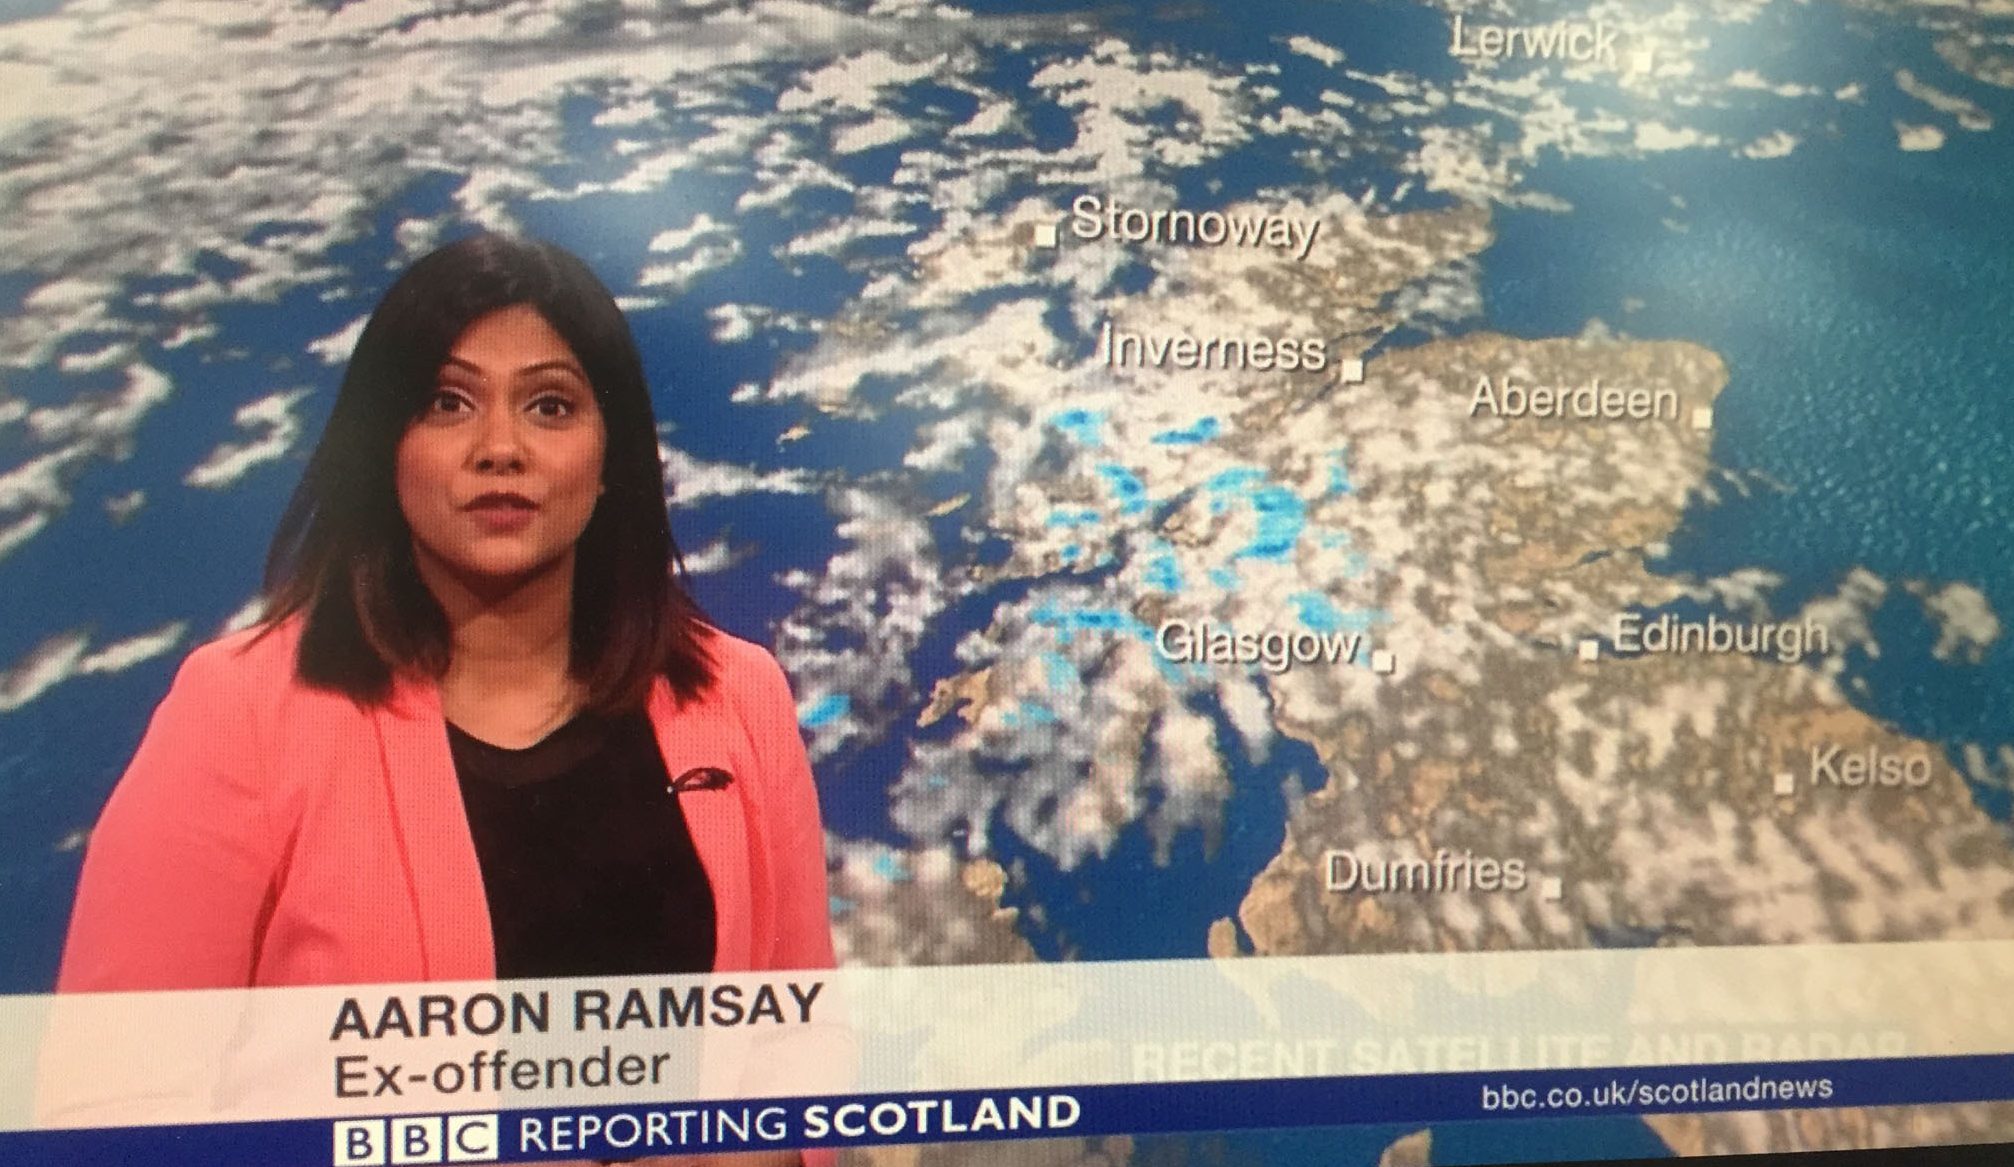 Weather presenter Kawser Quamer was accidentally labelled an "ex-offender" during a live broadcast (BBC Scotland/PA Wire)